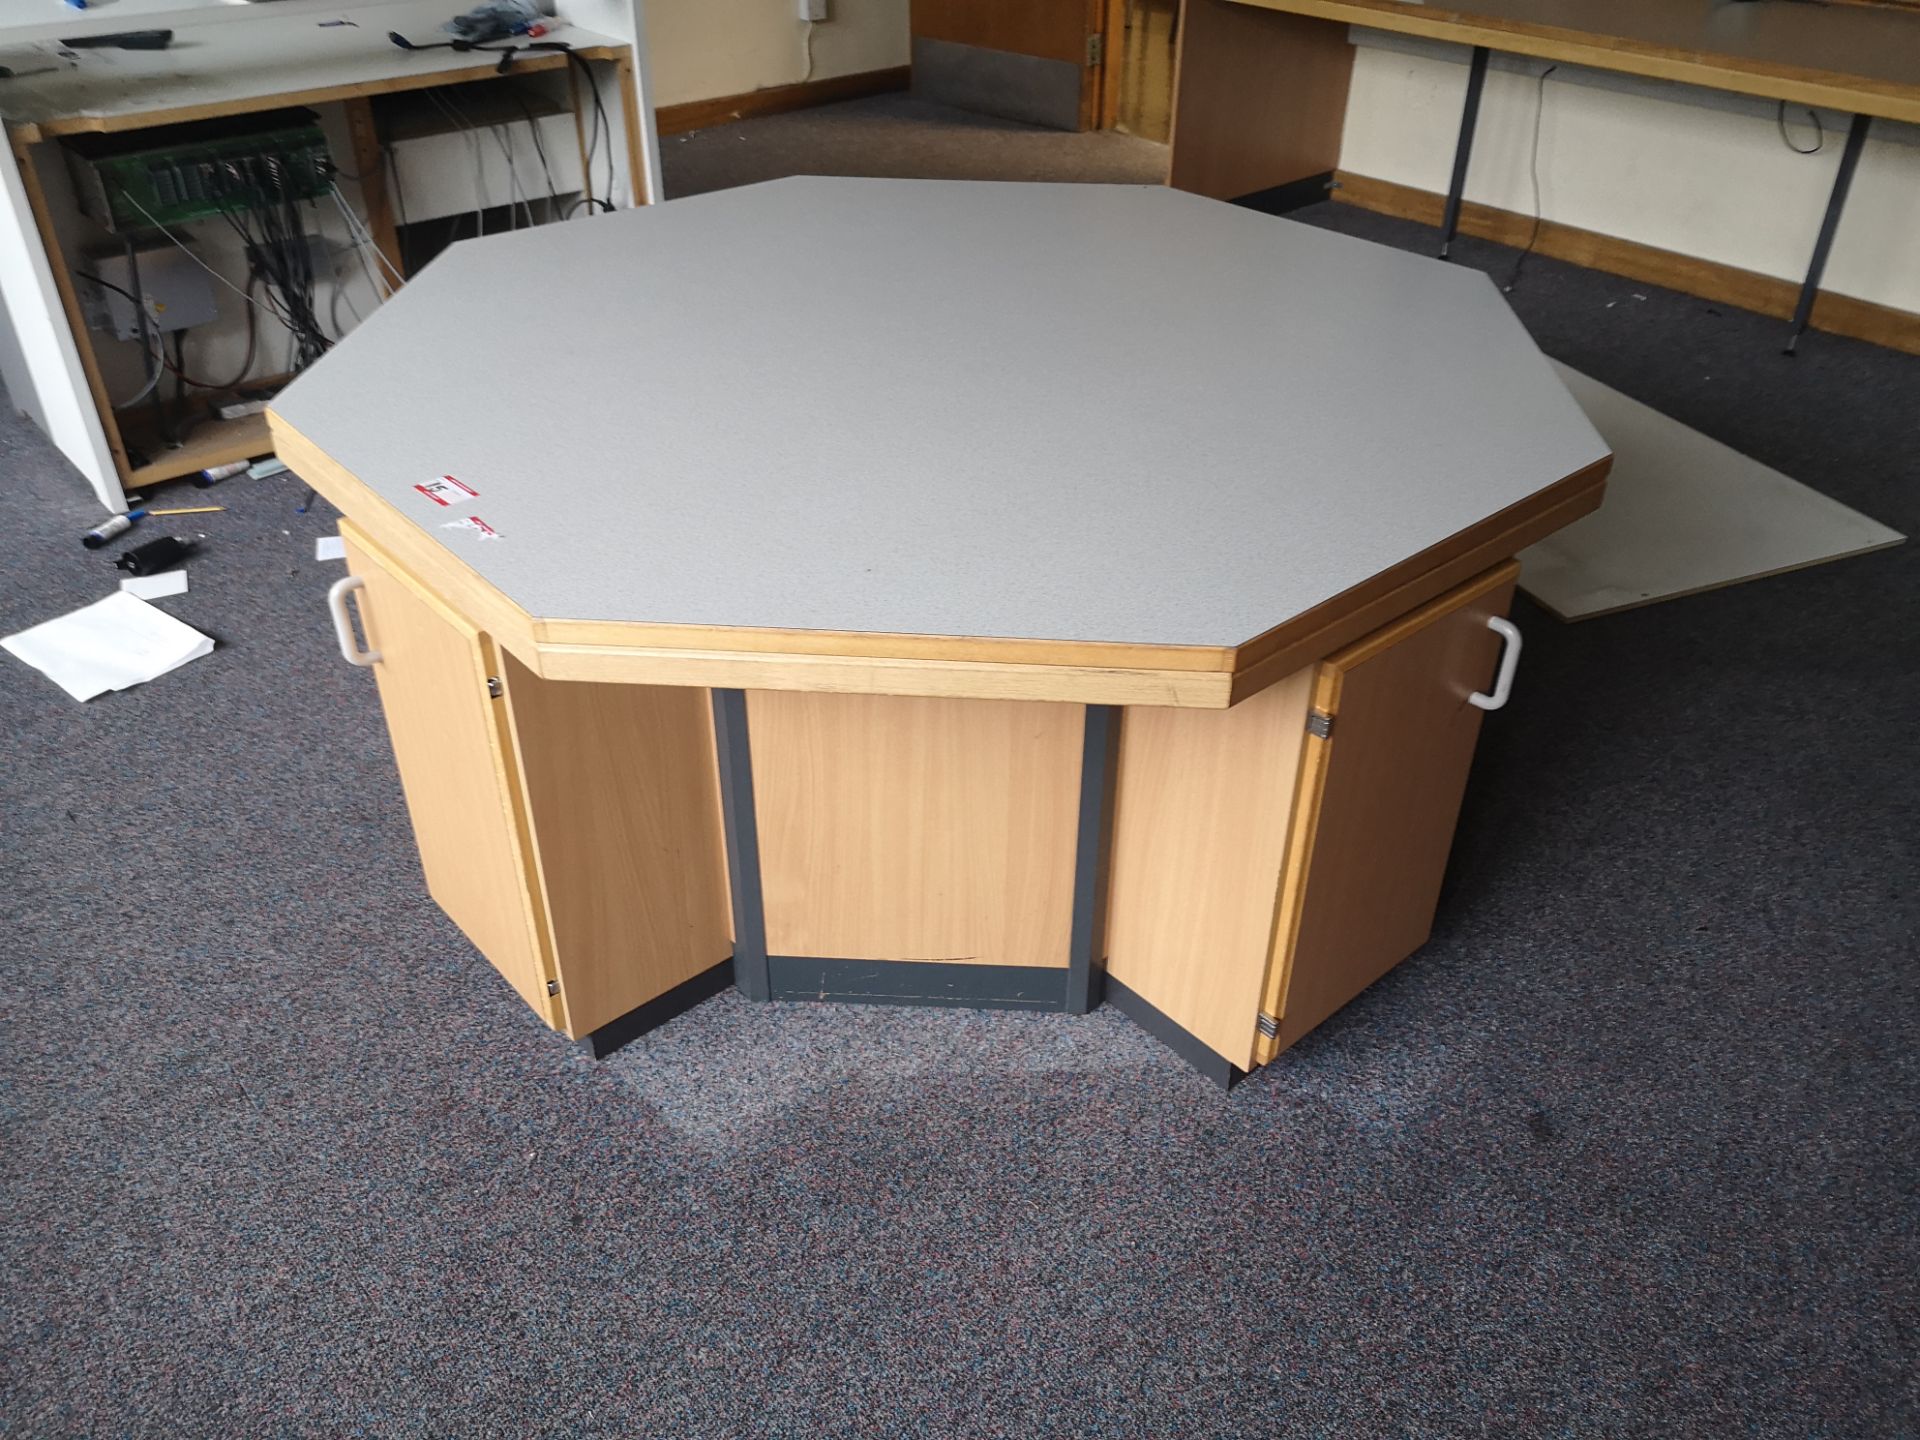 Large octagon wooden table with storage - Image 2 of 2